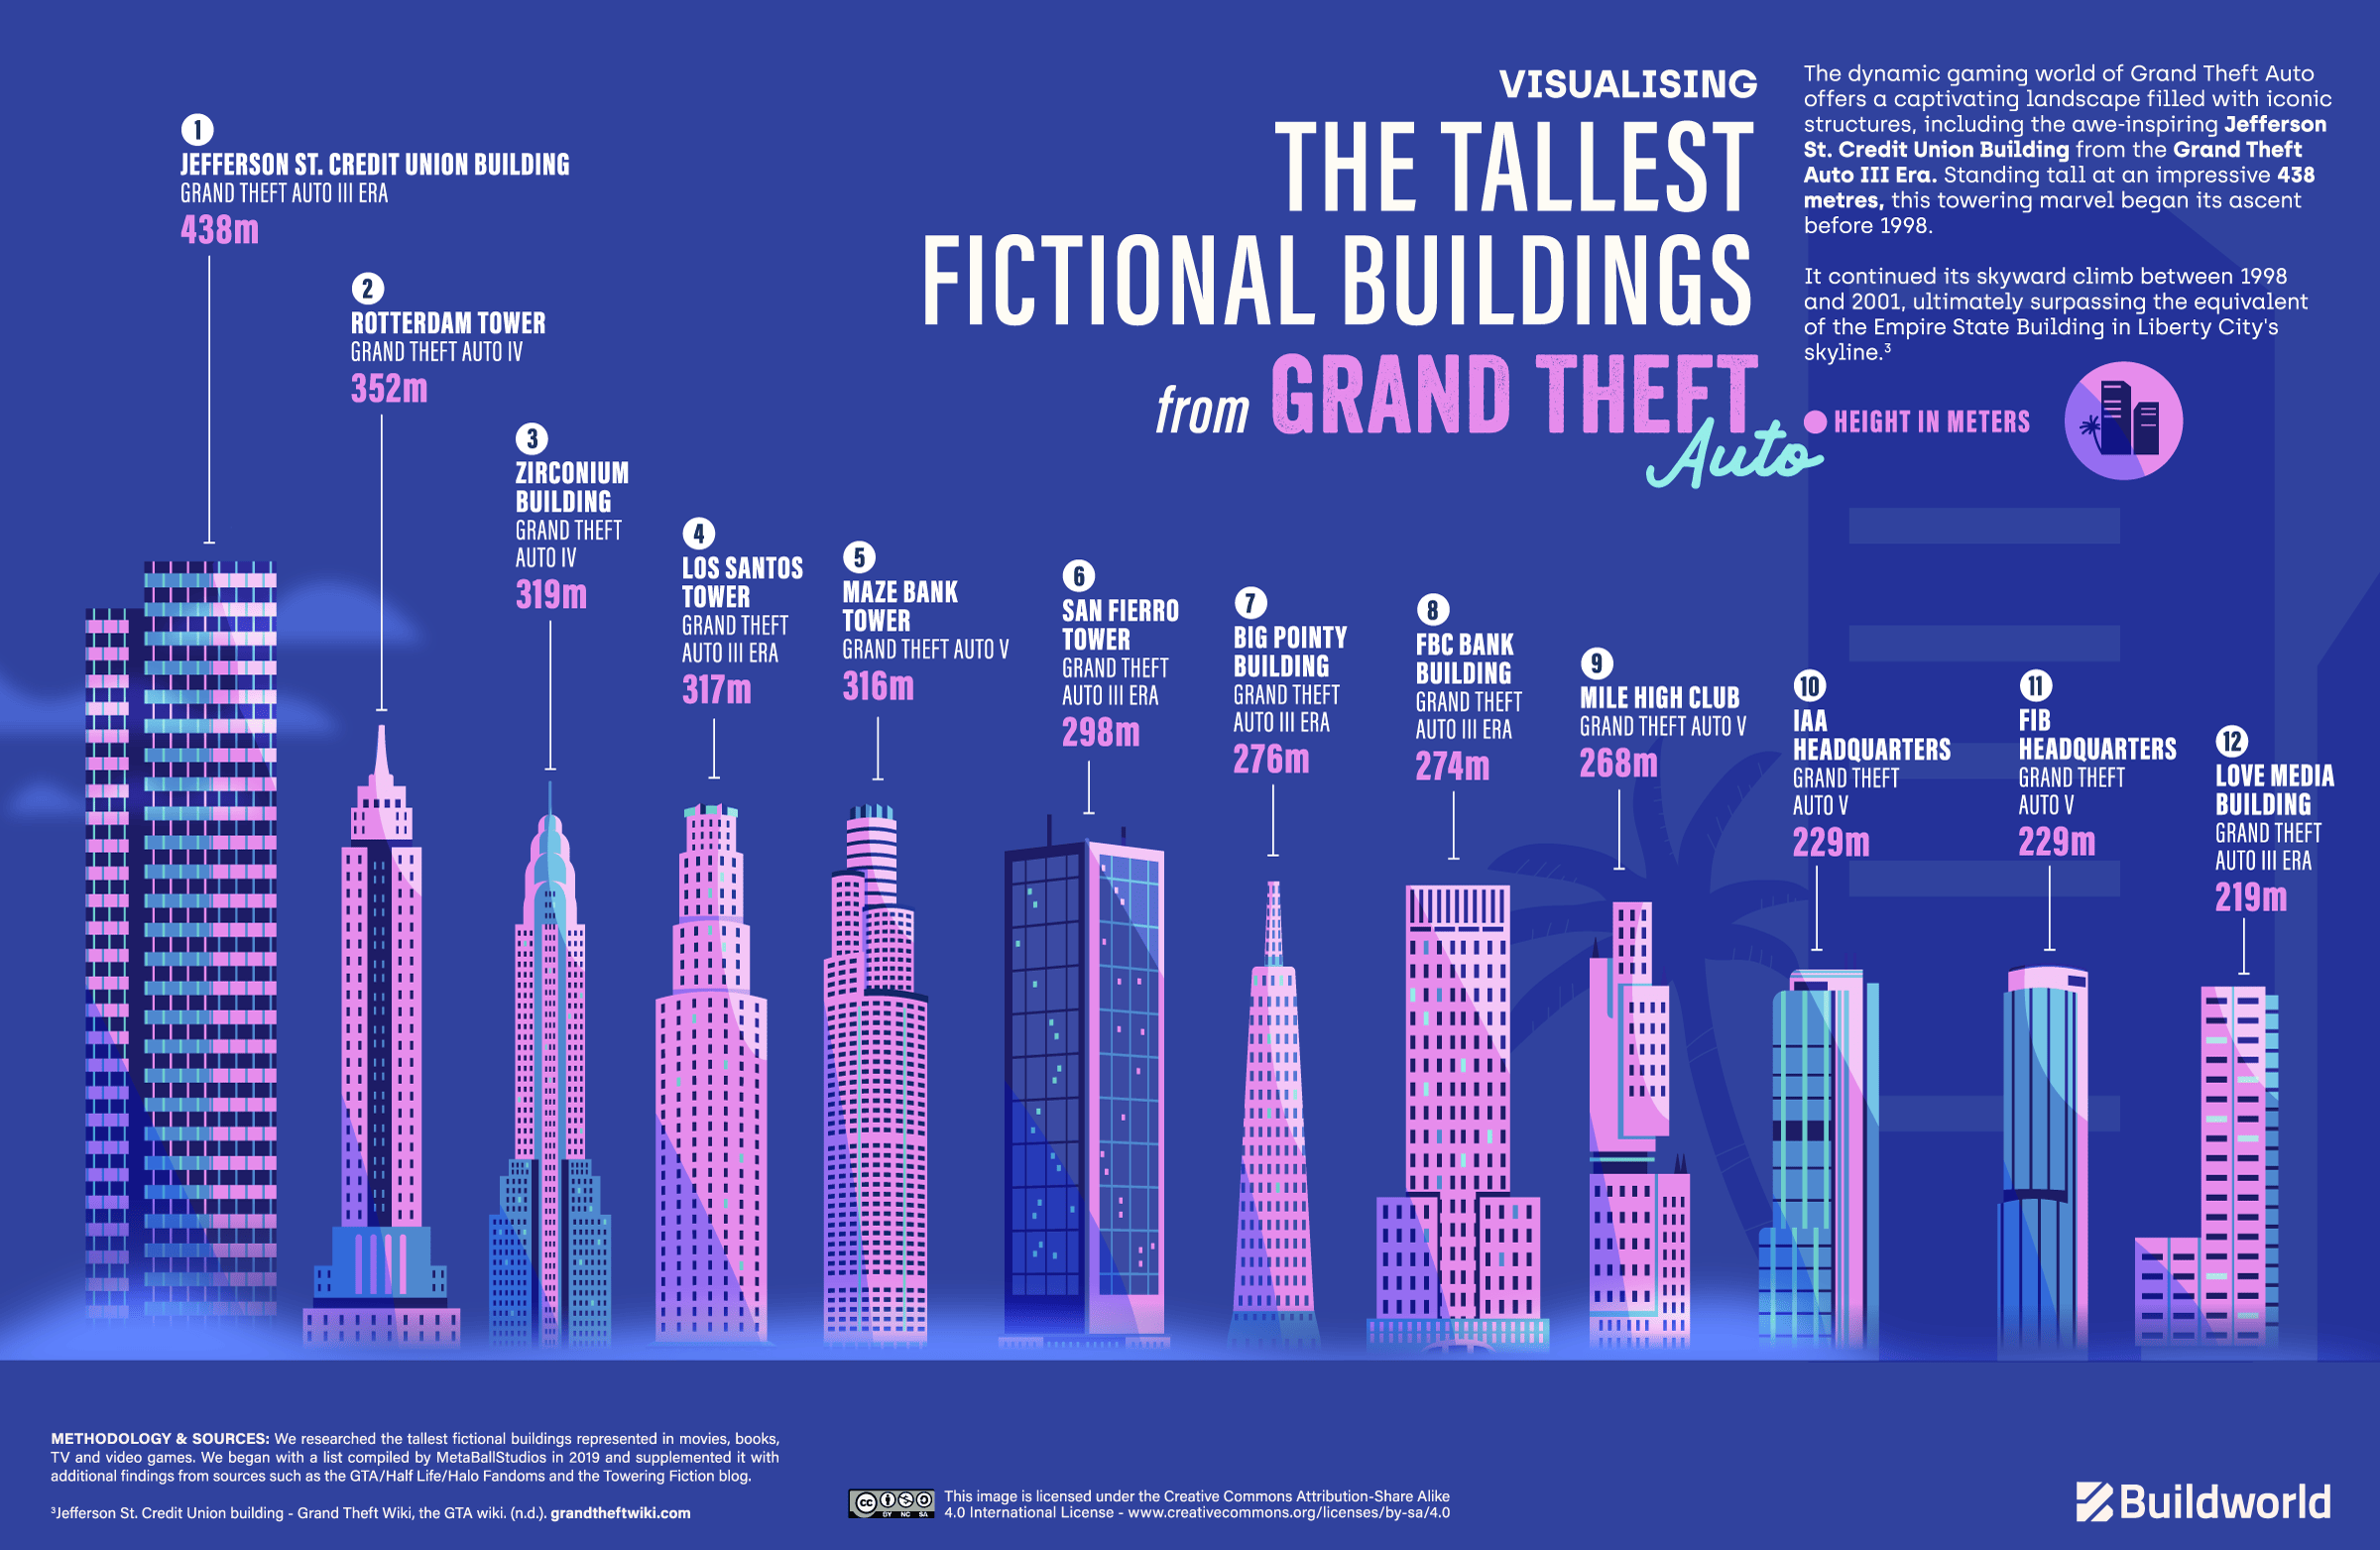 The tallest buildings from Grand Theft Auto visualised